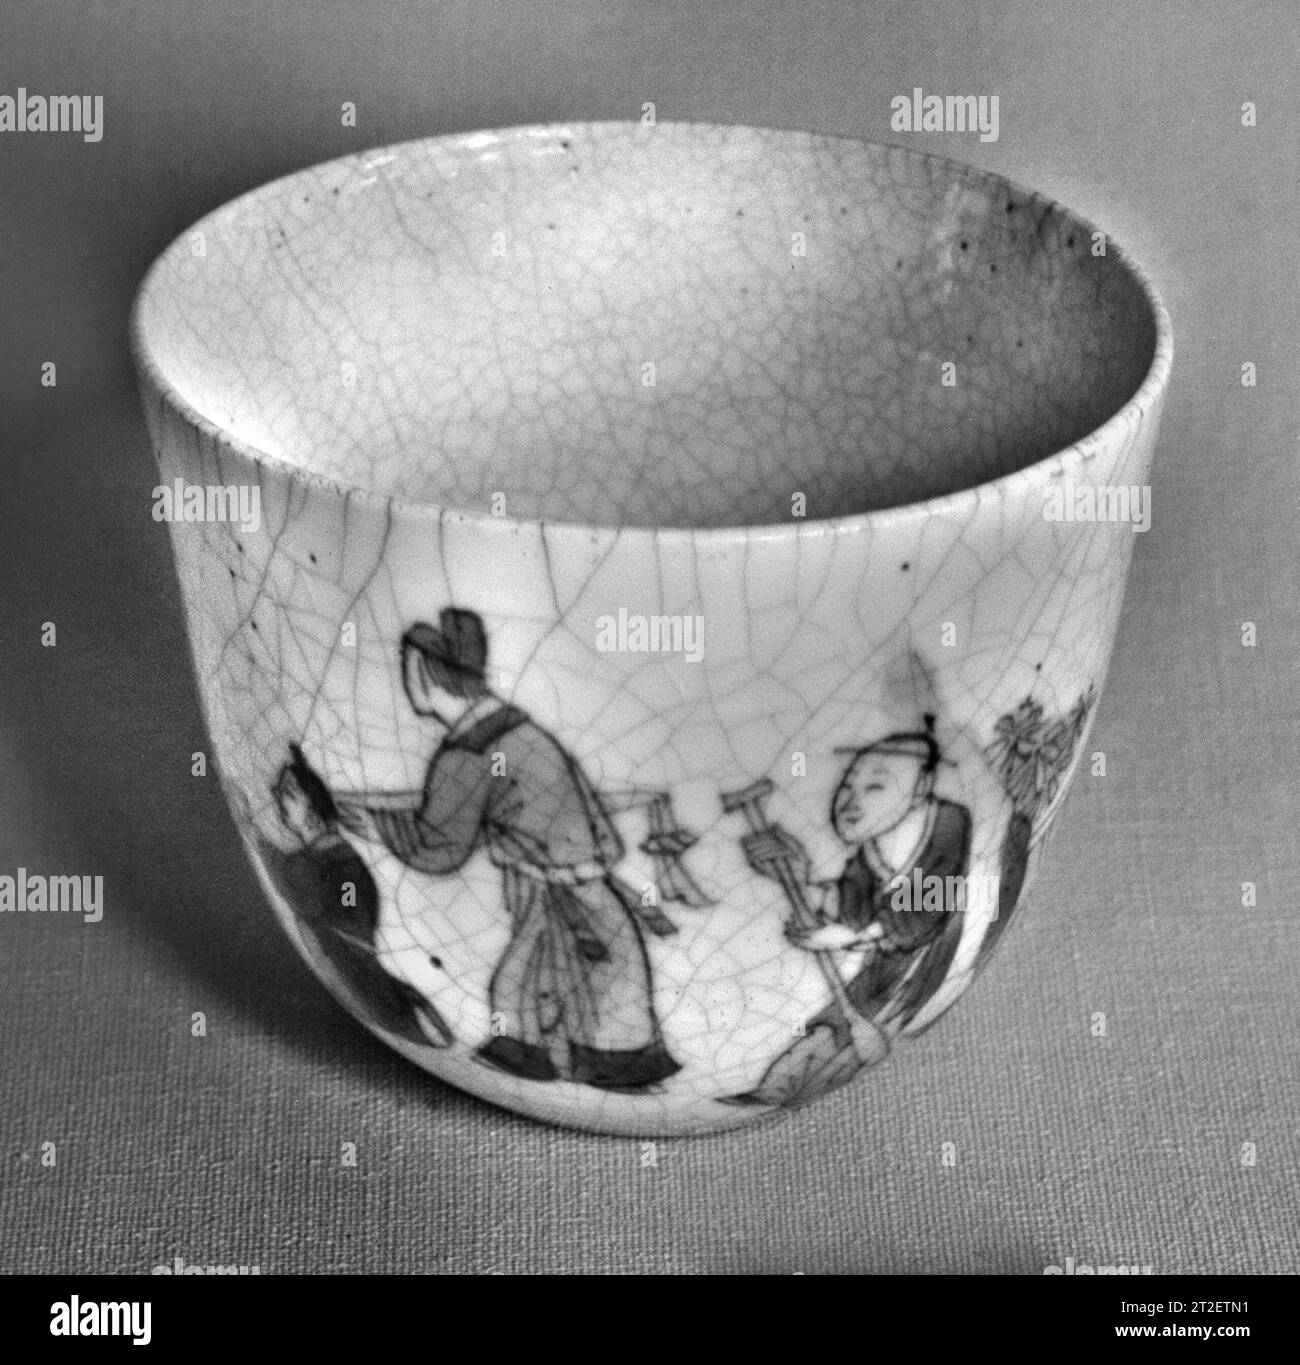 Cup with story of Li Bai and poem China late 17th–early 18th century View more. Cup with story of Li Bai and poem. China. late 17th–early 18th century. Soft-paste porcelain painted in underglaze cobalt blue (Jingdezhen ware). Qing dynasty (1644–1911), Kangxi period (1662–1722). Ceramics Stock Photo